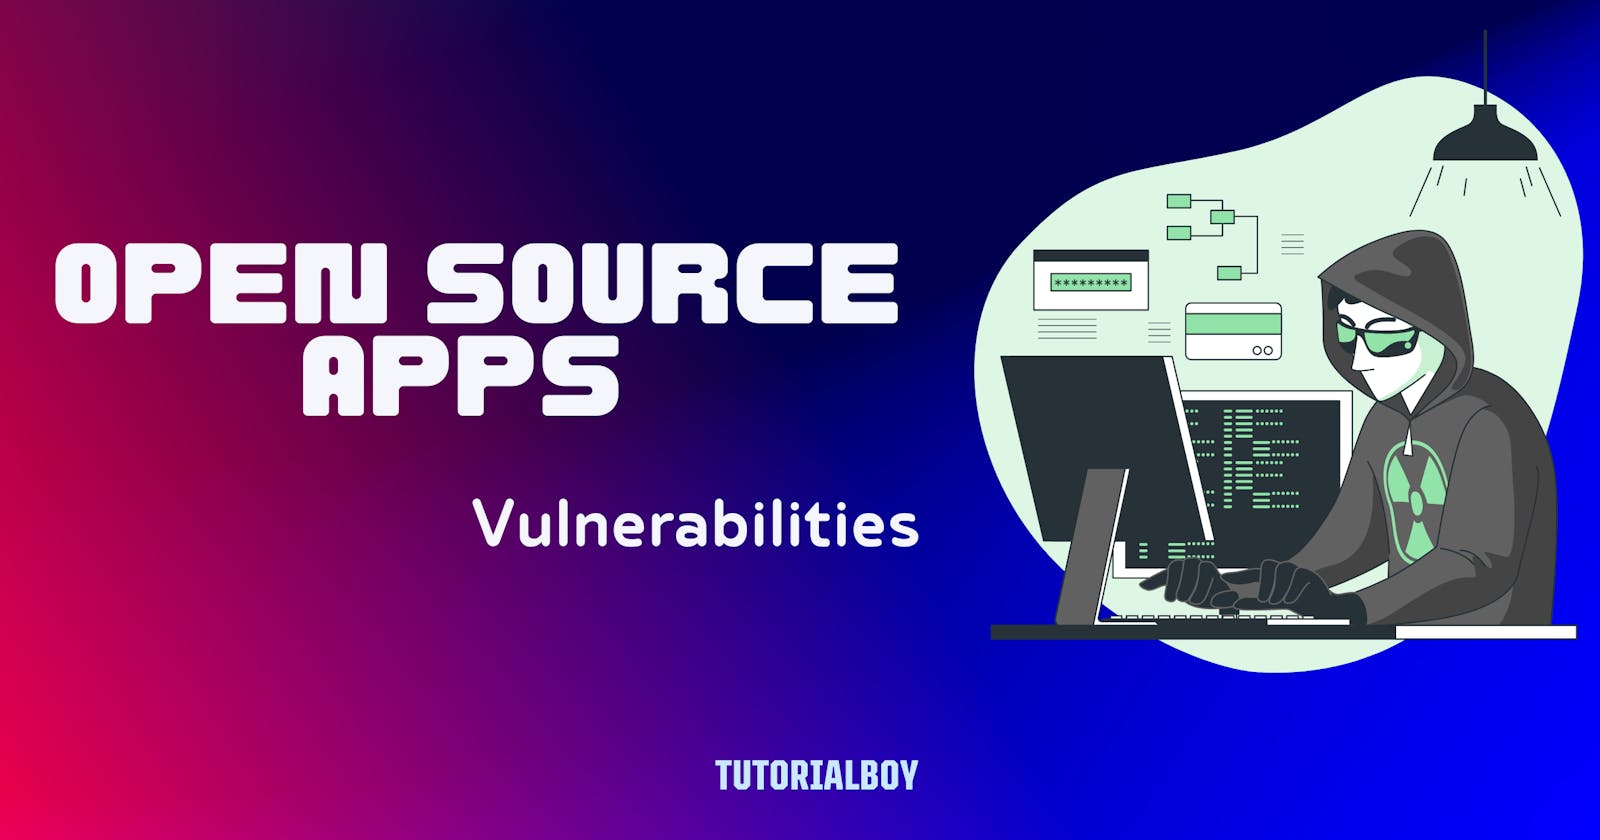 An Open Source apps Leads to XSS to RCE Vulnerability Flaws